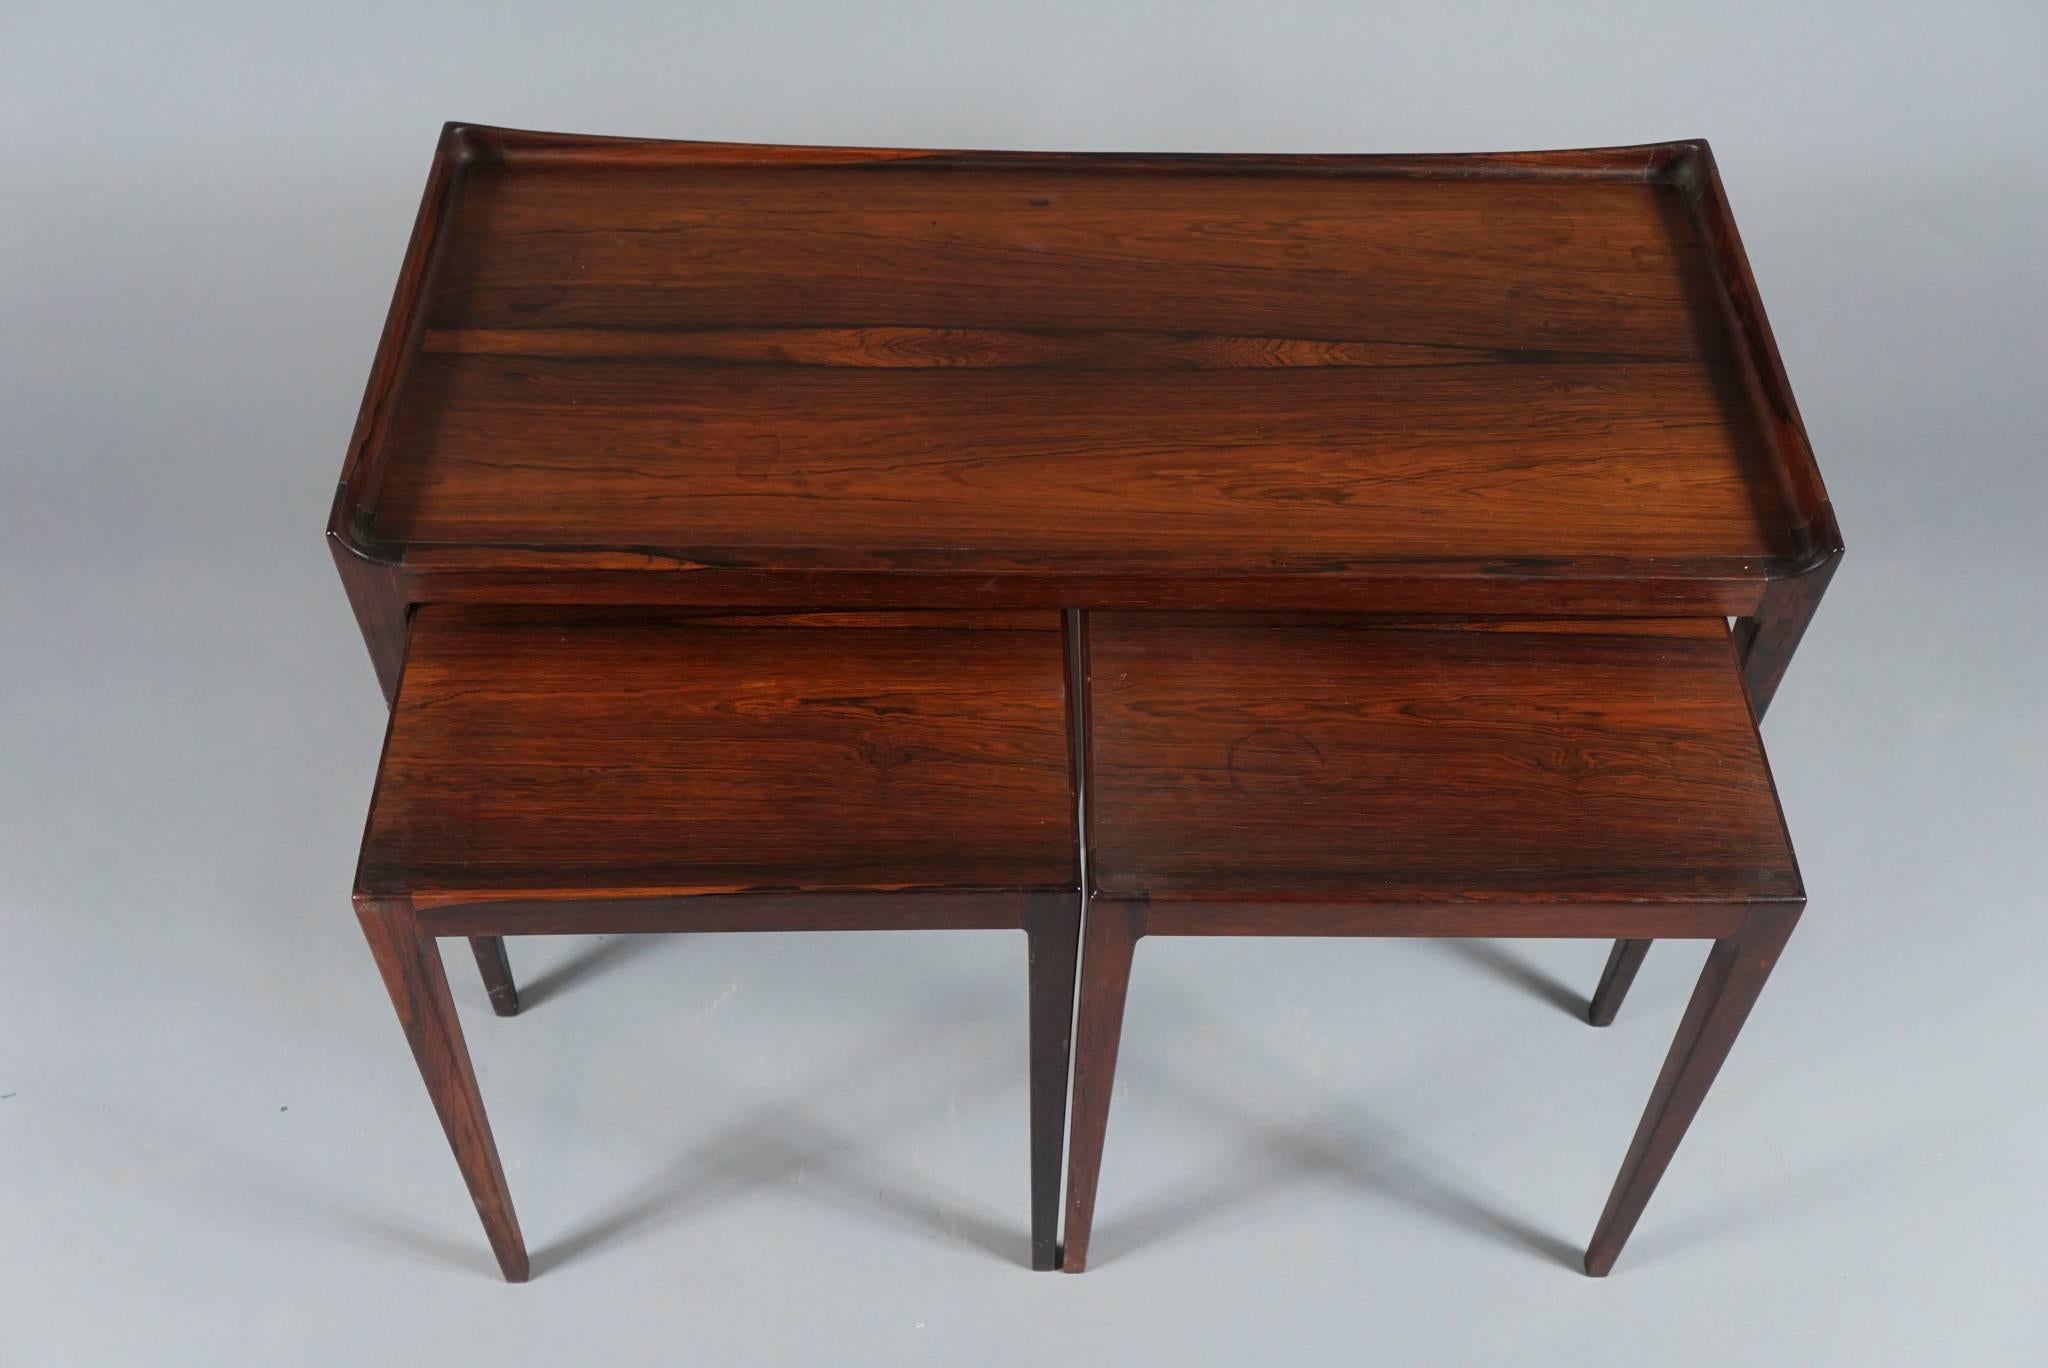 Finely crafted set of three tables having tapered legs by Danish designer, Kurt Ostervig in solid rosewood, the two square tables fitting underneath. The smaller tables measure: 14